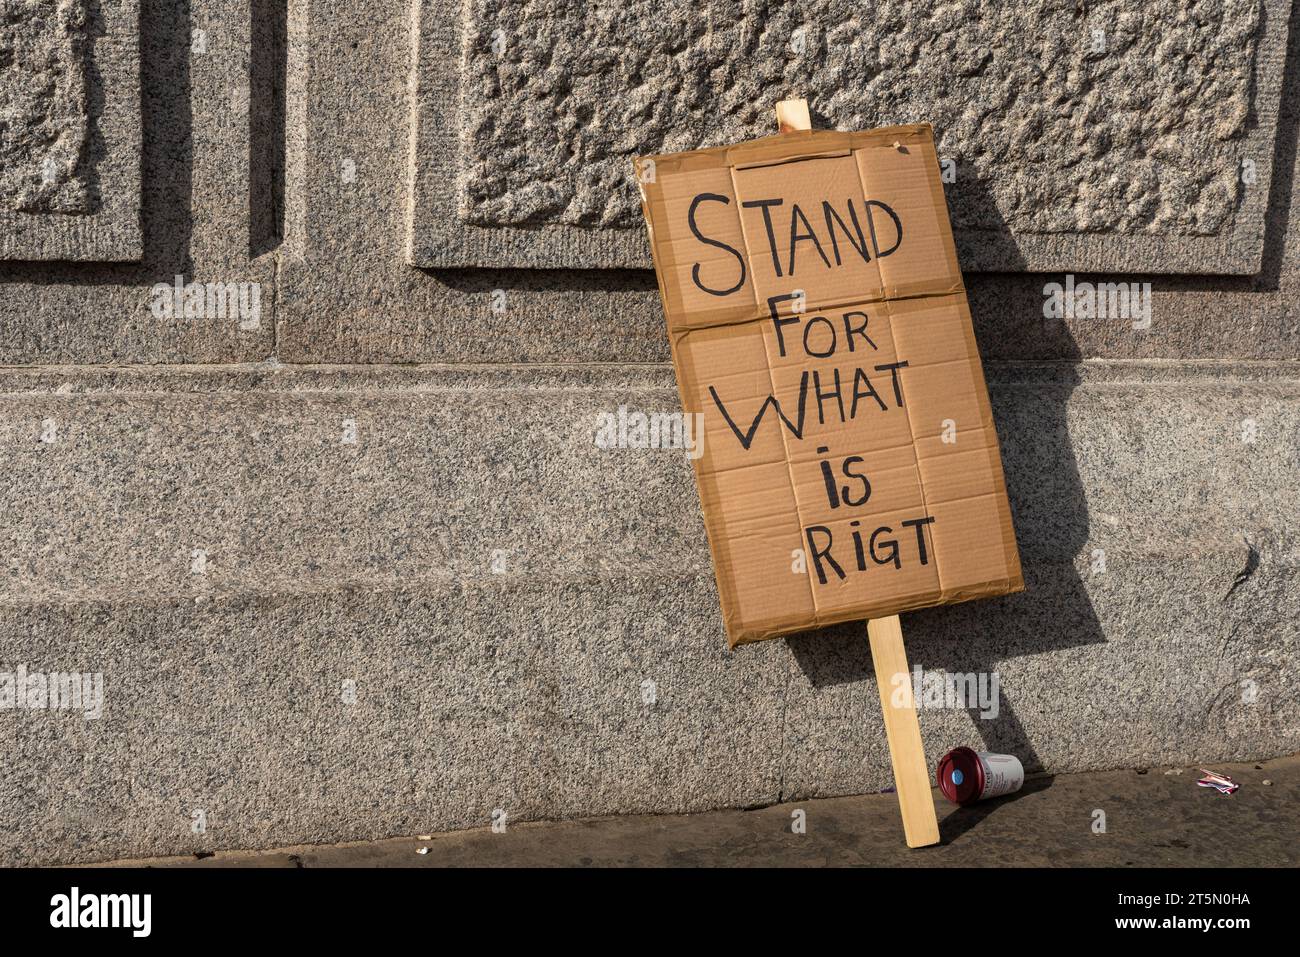 Humorously misspelt protest placard, attempting to say Stand for what is right, but with incorrect spelling of right as rigt. At anti vaccine protest Stock Photo